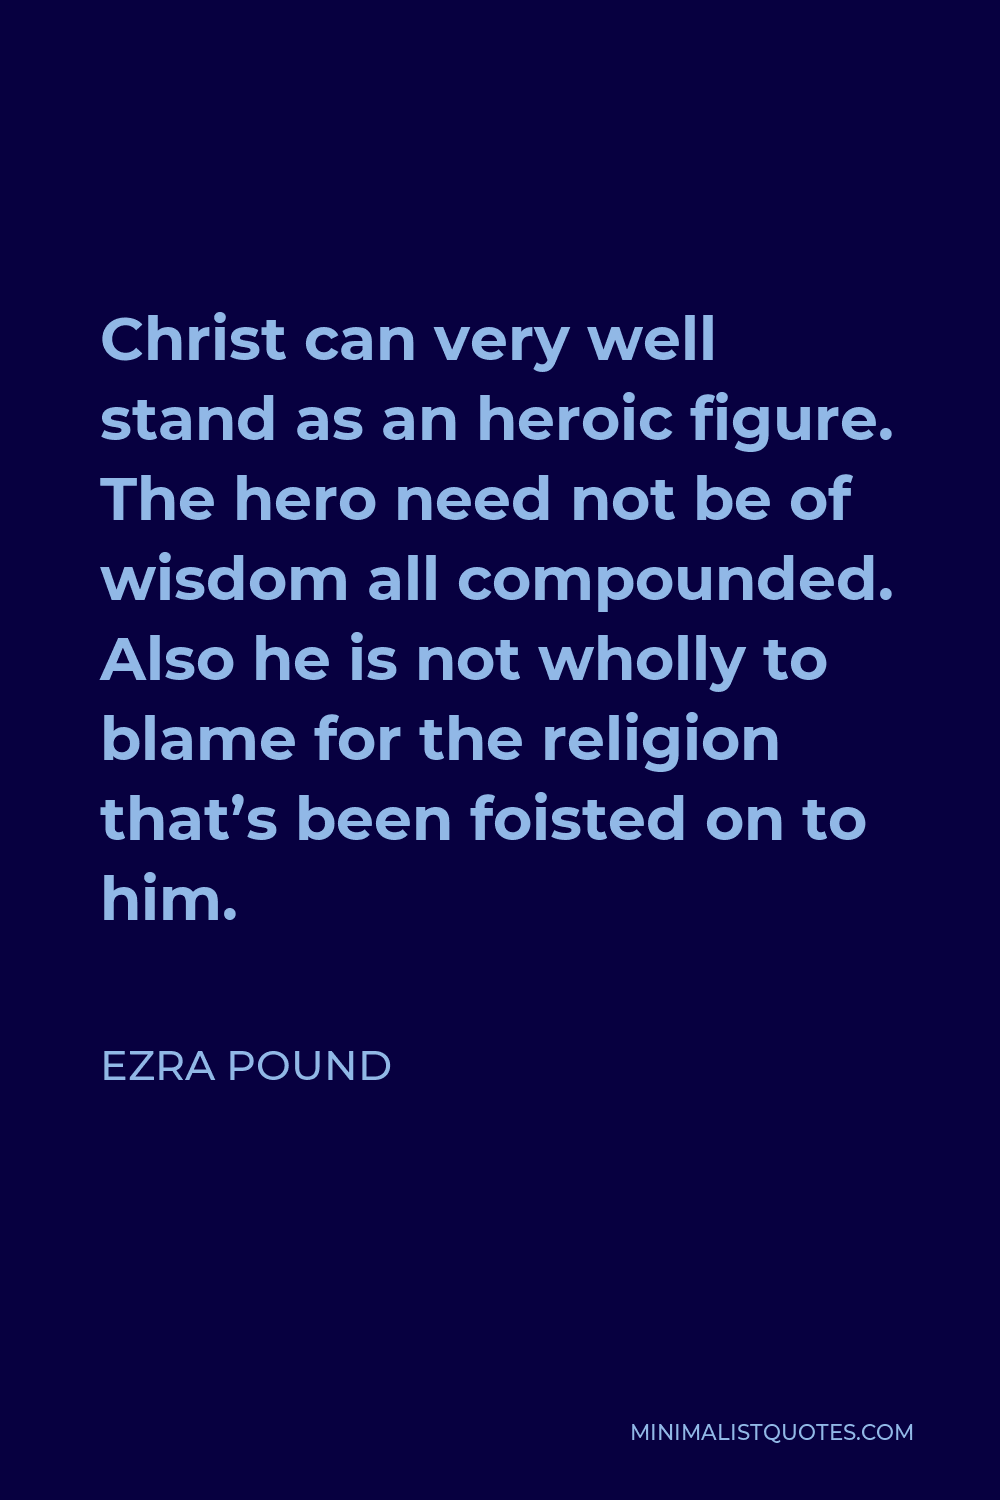 Ezra Pound Quote - Christ can very well stand as an heroic figure. The hero need not be of wisdom all compounded. Also he is not wholly to blame for the religion that’s been foisted on to him.